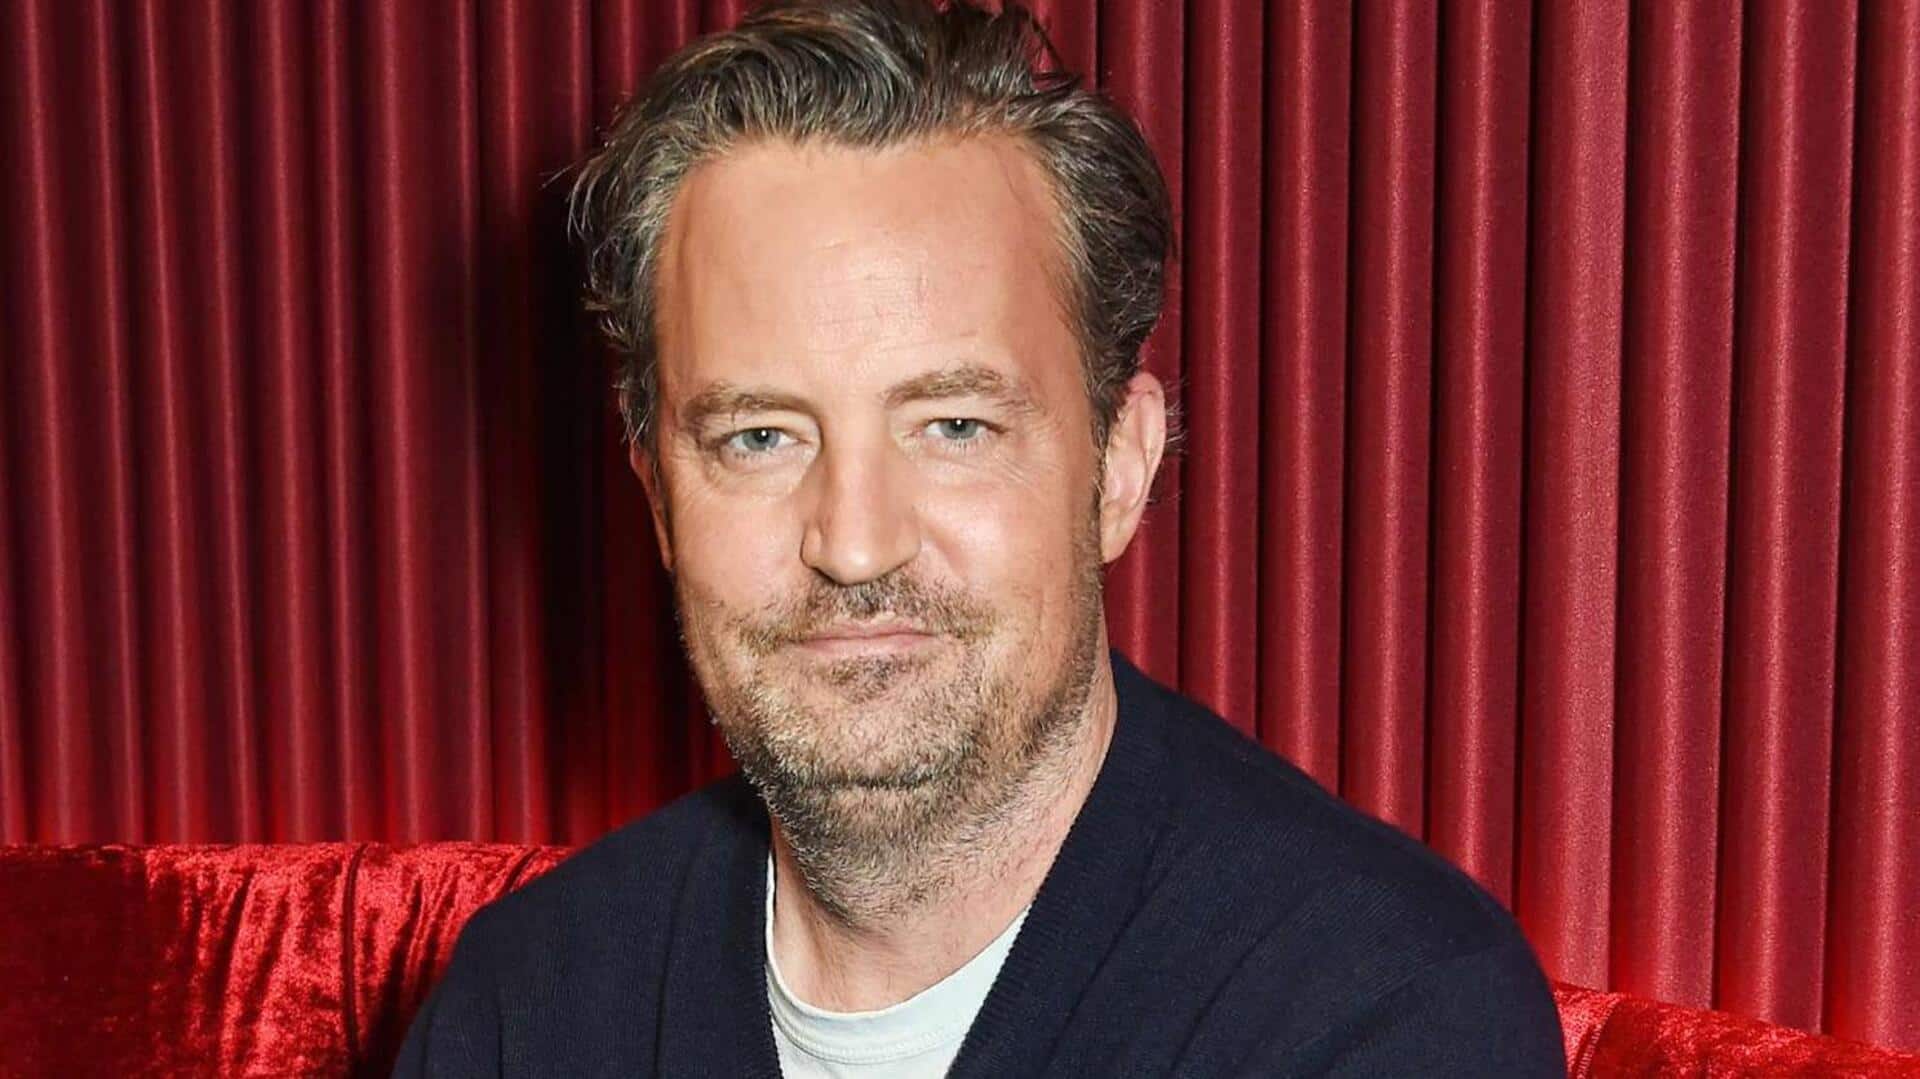 'F.R.I.E.N.D.S' star Matthew Perry passes away at 54: Sources